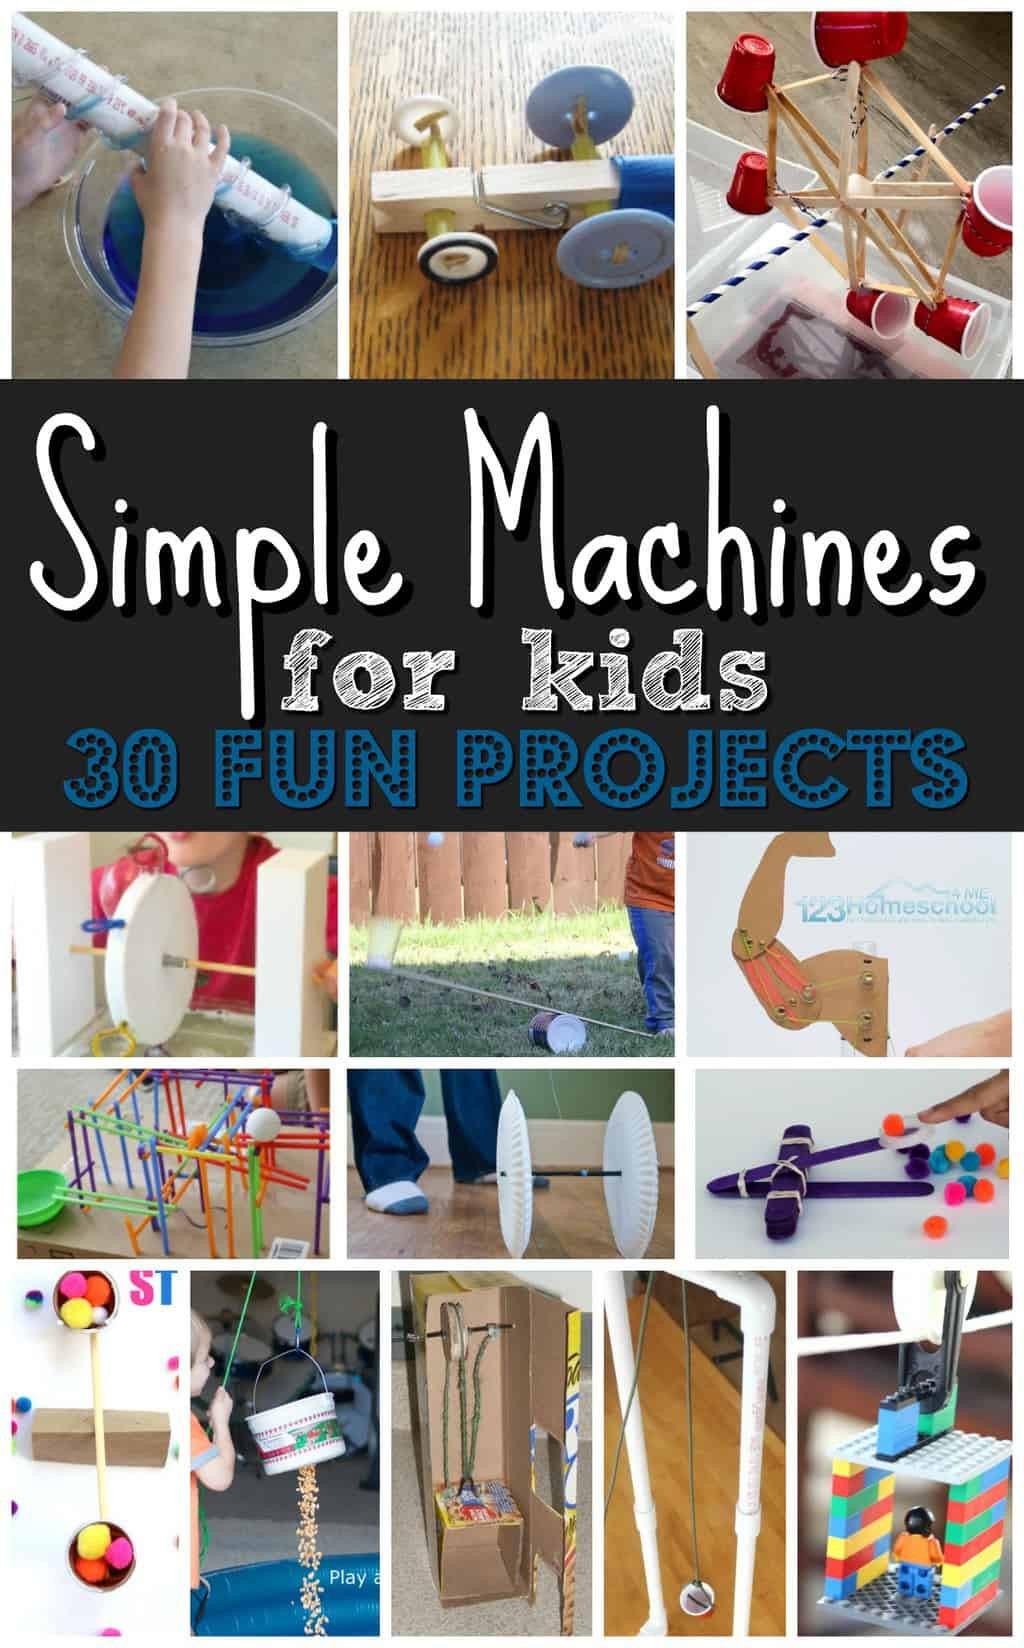 Simple Projects For Kids
 30 Simple Machine Projects for Kids